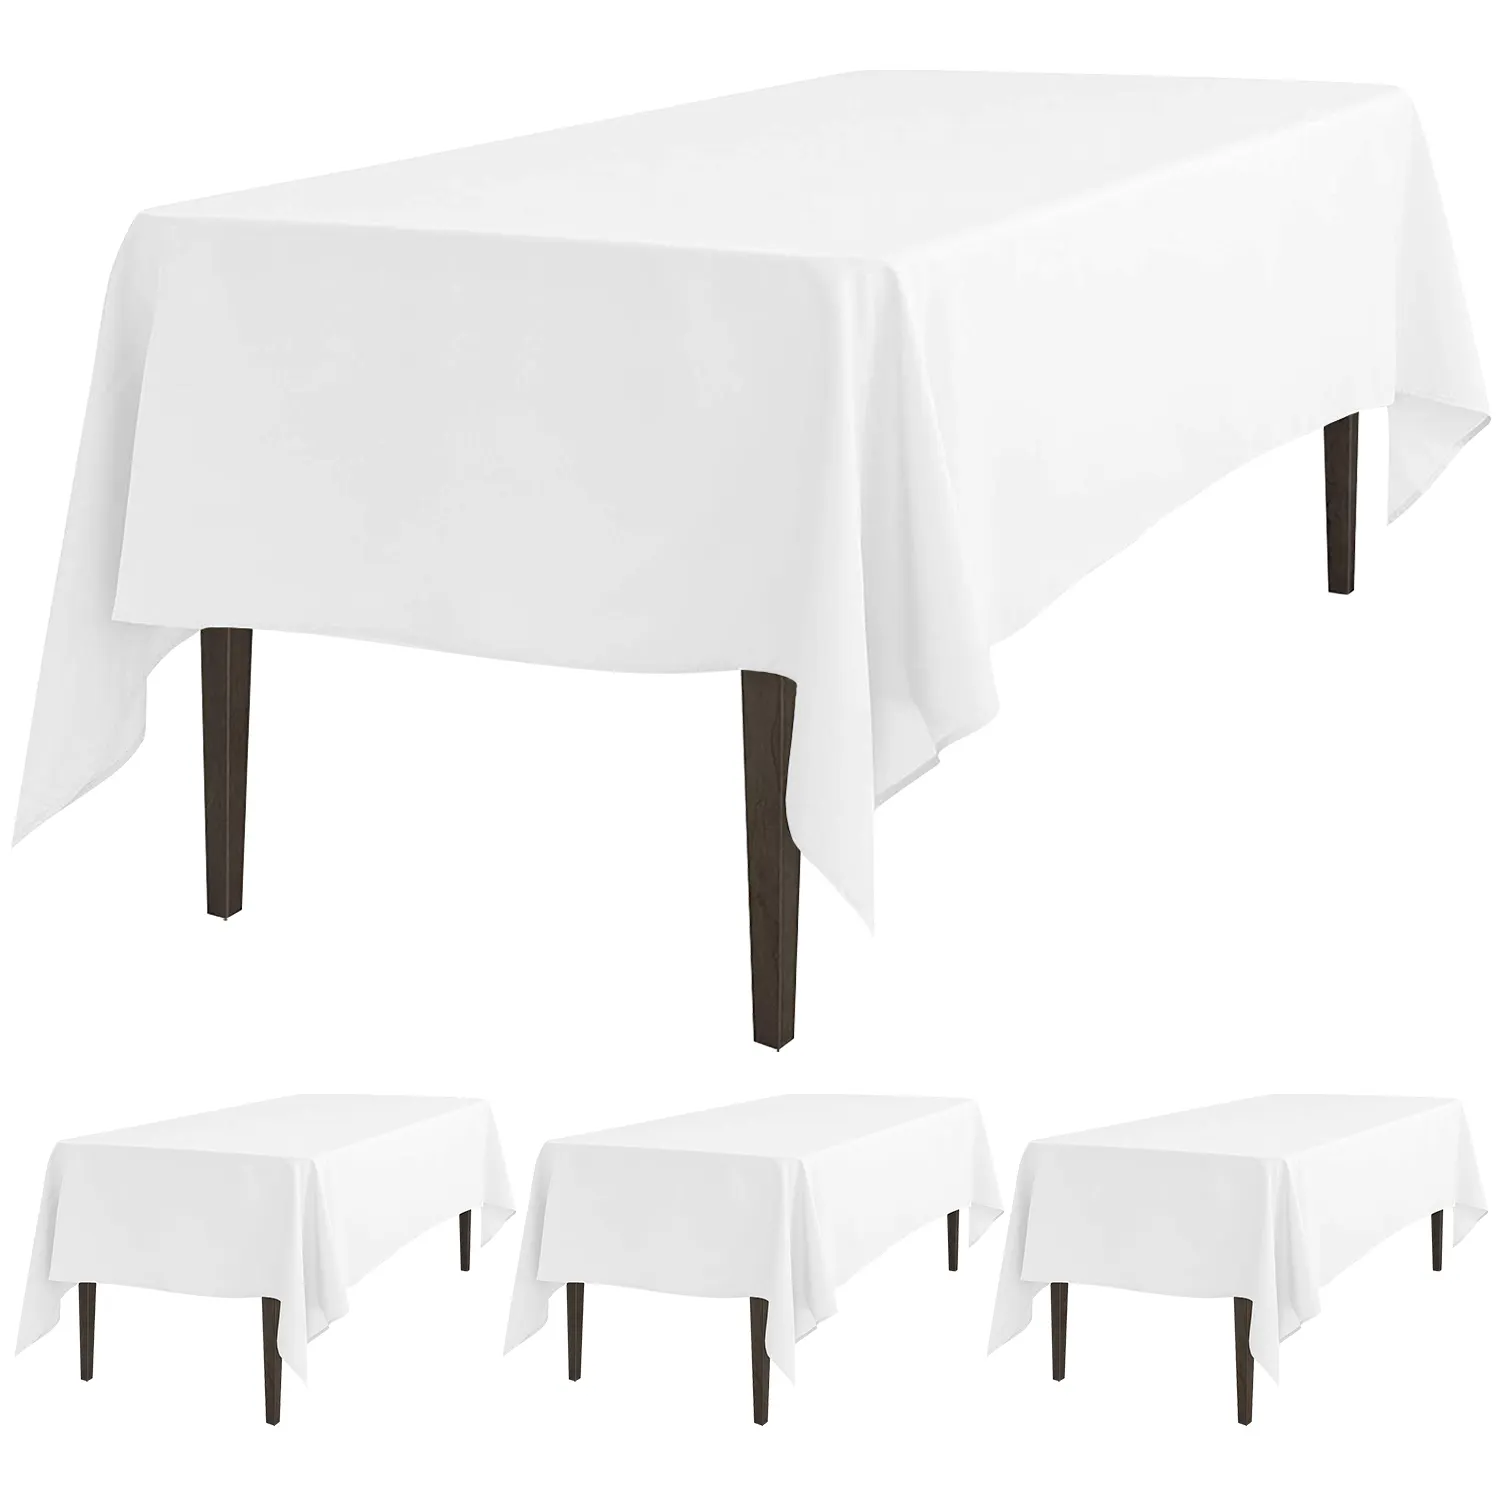 60 x 102 Inch Rectangular Washable Polyester White Party Wedding Tablecloths Table Cloth